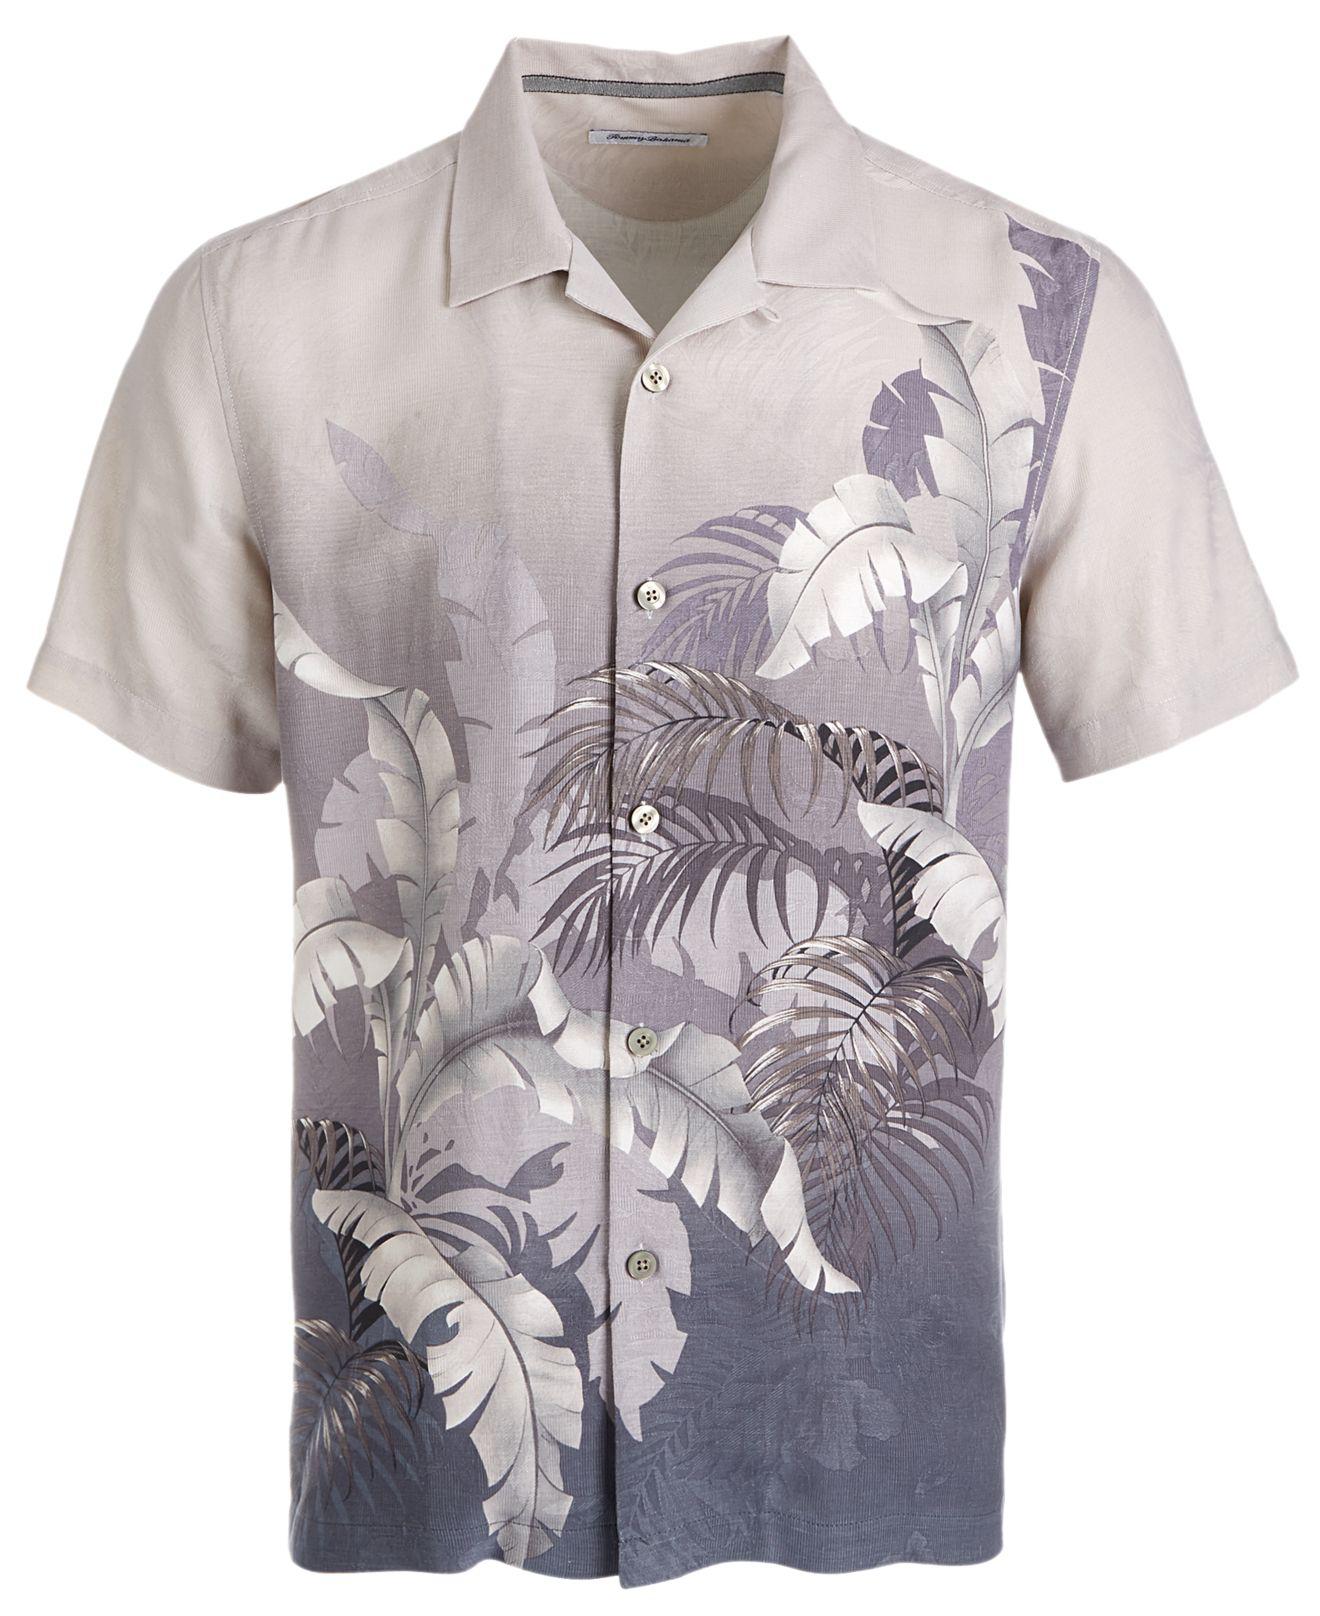 tommy bahama floral shirt